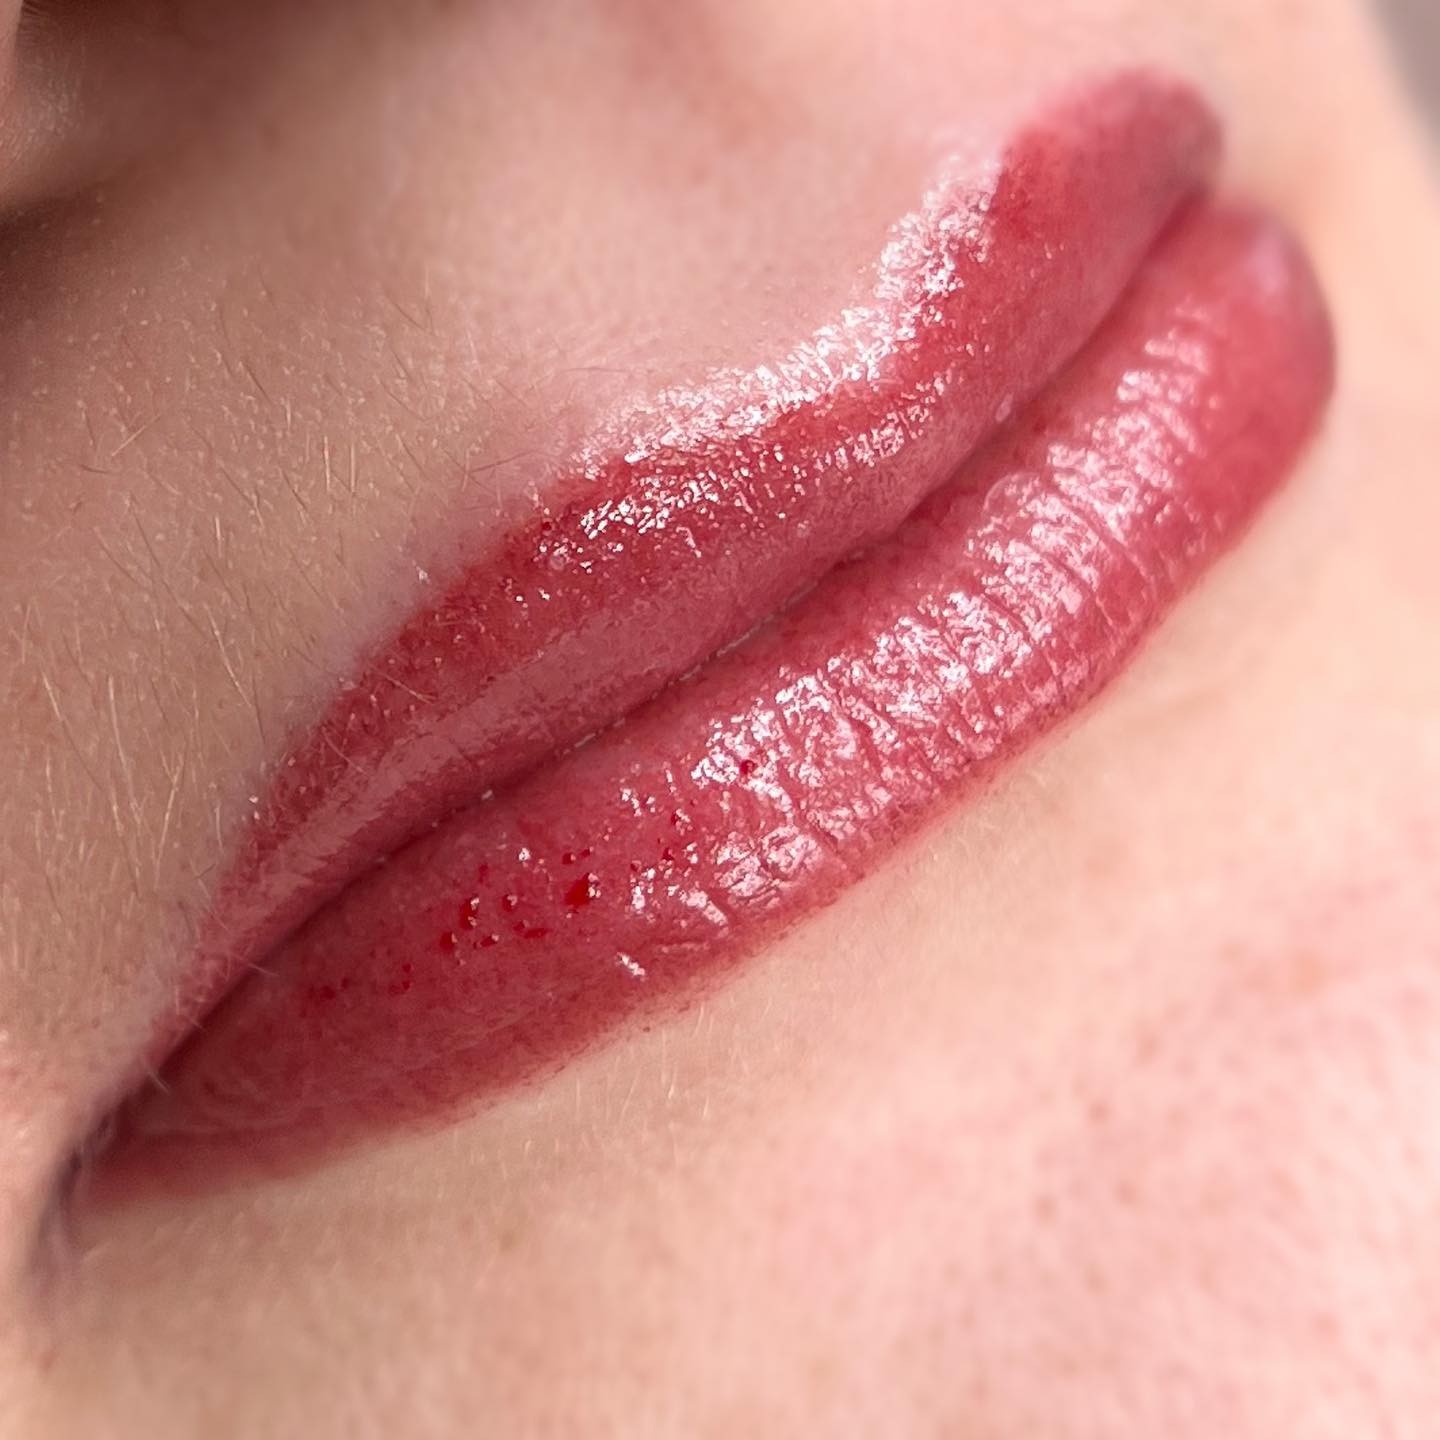 Lip blush in nude tones. ➡️ did you know that lip tattoos fade 50-60% during the healing process‼️ So this color will fade into a lovely fleshy tone. 
Lip Tattoo 
❇️ stay put color
❇️ defines lip shape
❇️ brings back color to white/ clear lips
❇️ looks pretty 🤩 
Book on winkandinked.com or call me for a more in-depth conversation. 
💋💋💋💋💋💋💋💋💋💋💋💋
#nhwinkbabe #winkandinked #nhbrows #nhbrowsalon #derrynh #derrybrows #derryblogger #nhblogger #nhsalon #nhbrowspecialist #nhbrowartist #nheyelinertattoo #nhbrowtattoo #microbladingnh #nhmicroblading #browsnh #manchesternh #nashuanh #nhfashion #nhliptattoo #nhtattoo #cosmetictattoonh #nhwinkbrows #nhpermanentmakeup #newhampshire #603brows #nhpowderbrows #nhmakeupartist #nhmakeup #nhlashes